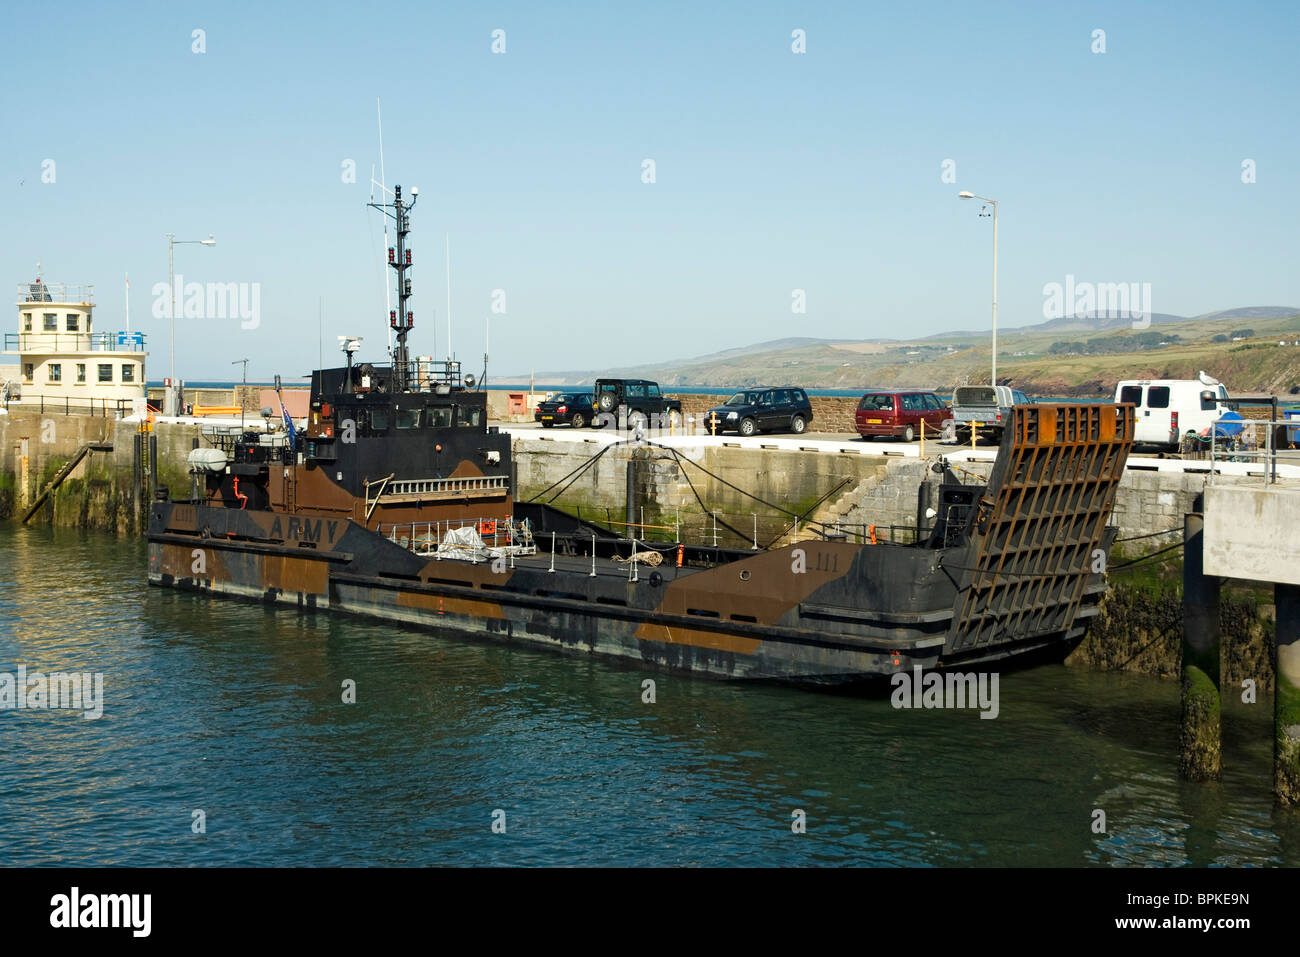 Army landing craft L111 moored at Peel Harbour, Isle of Man Stock Photo